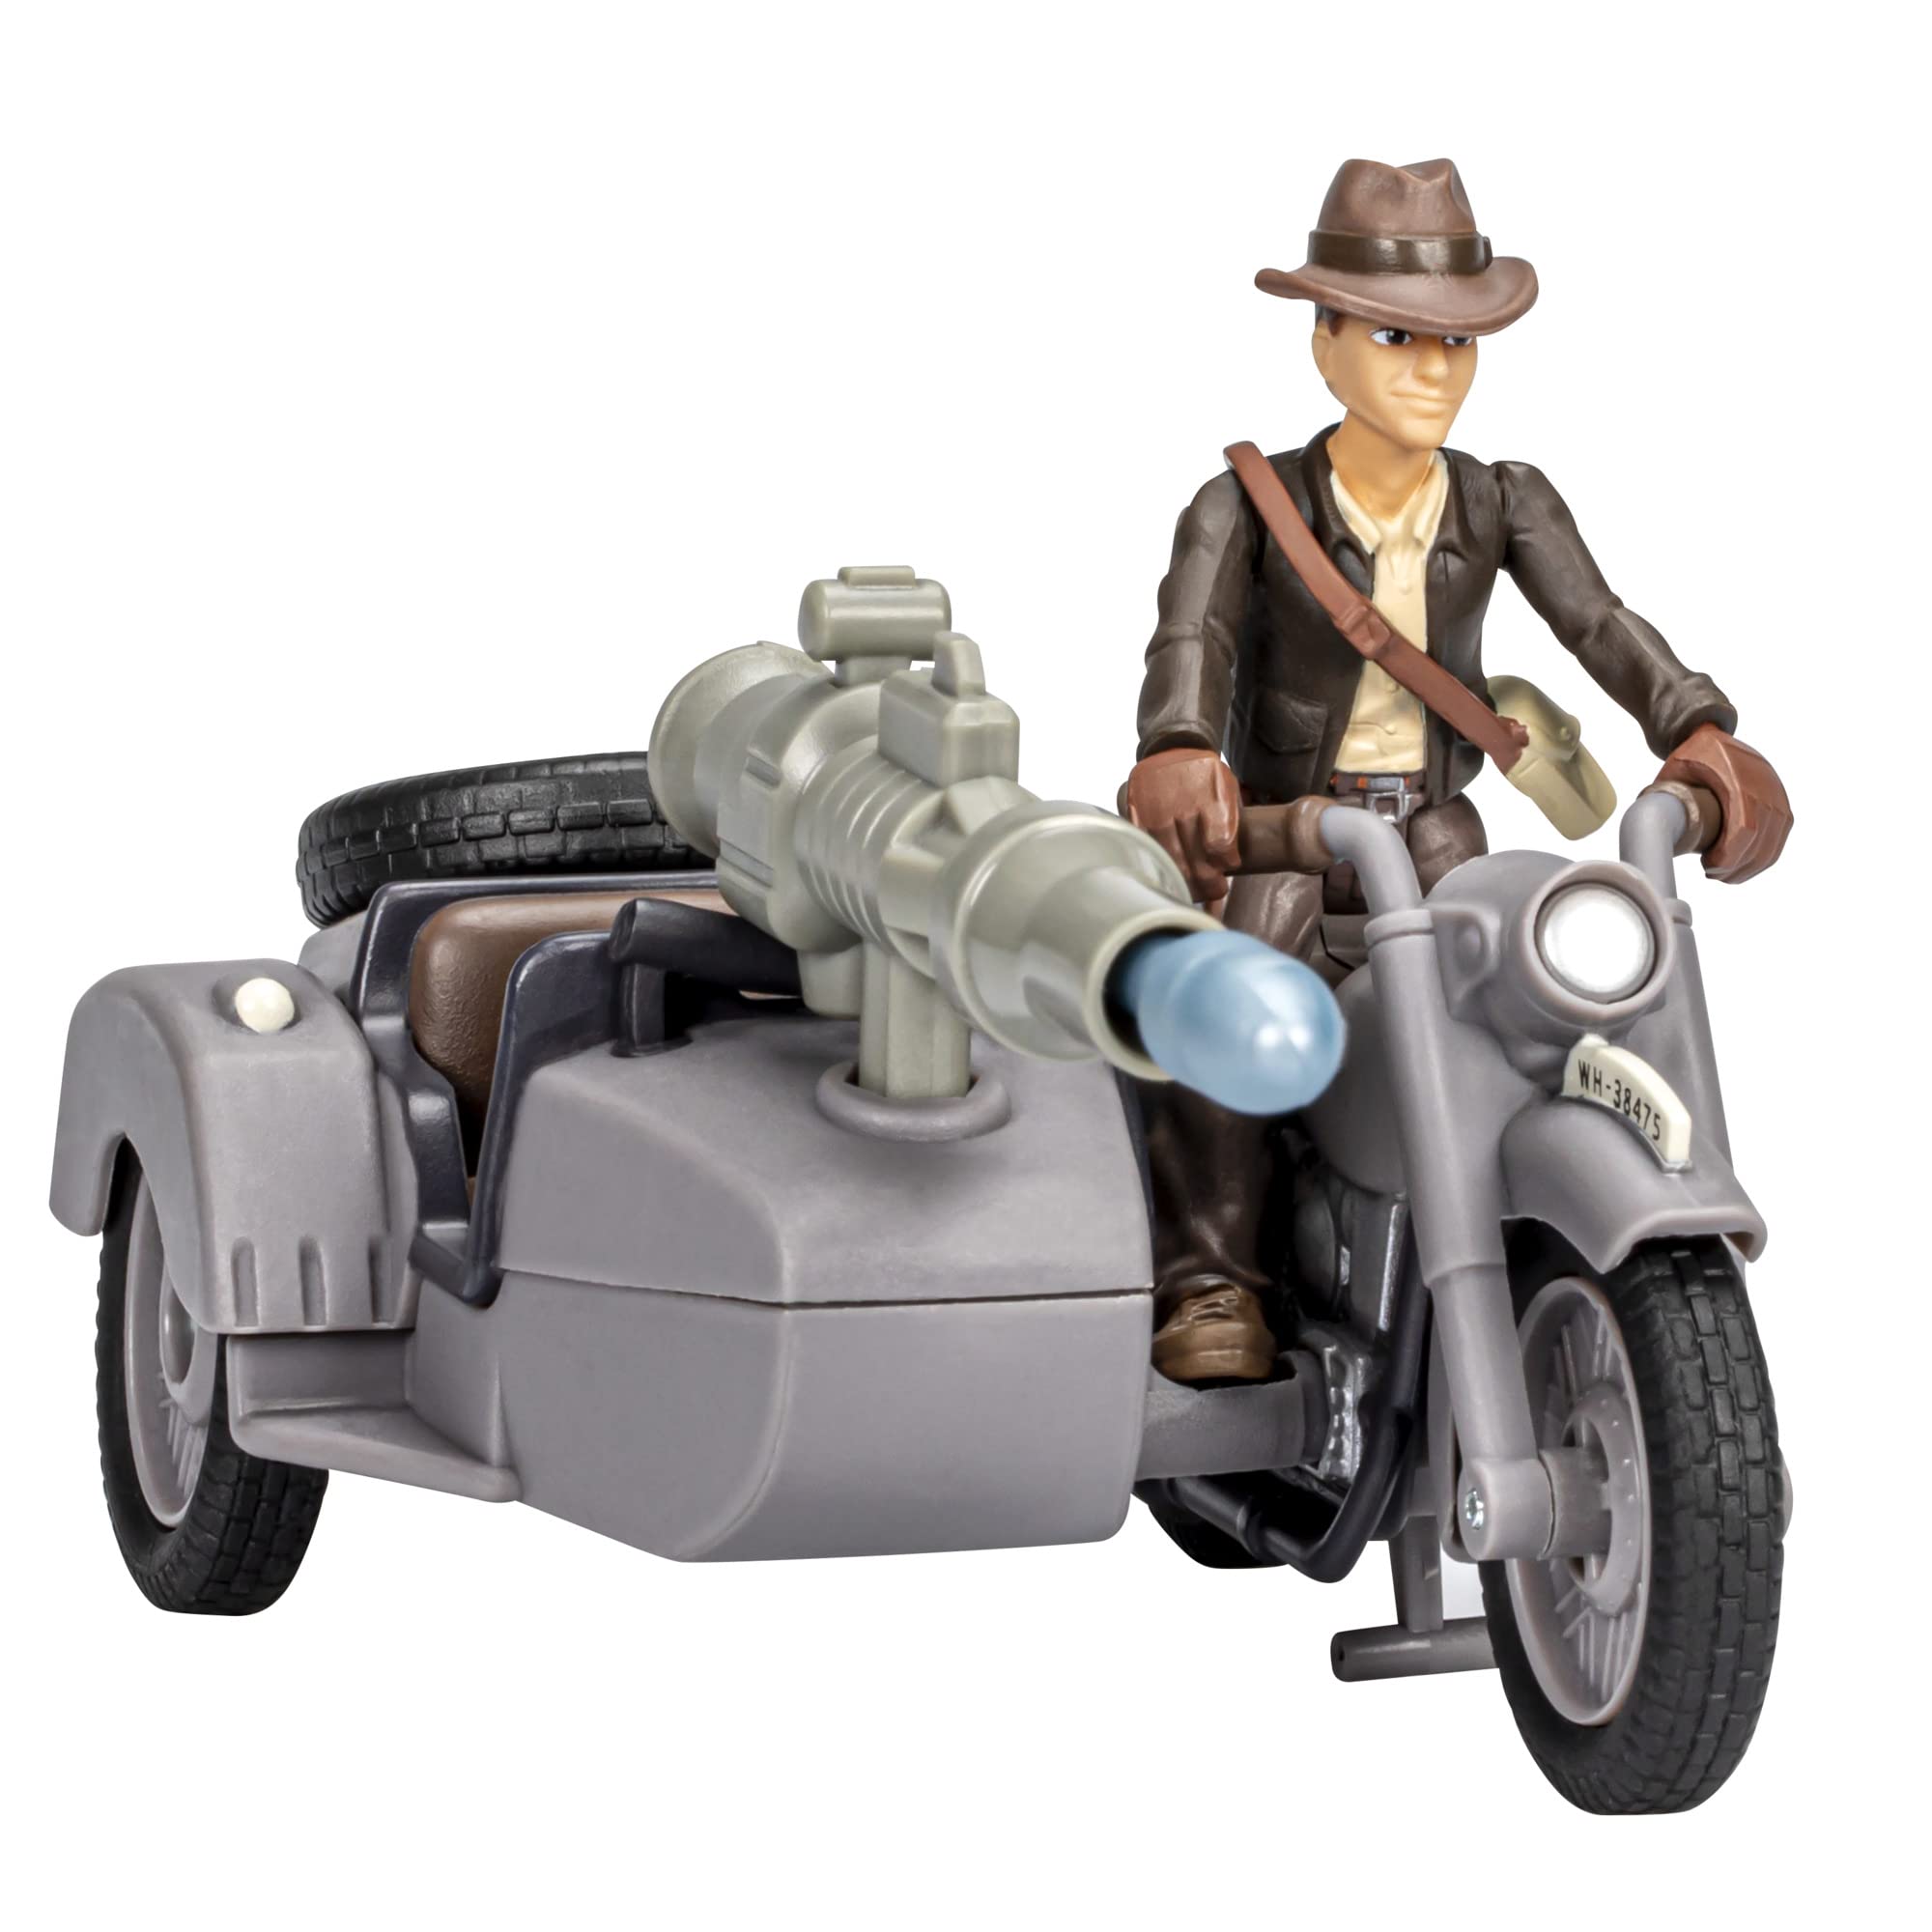 Indiana Jones Hasbro Worlds of Adventure with Motorcycle and Sidecar Action Figure Set, 2.5-inch, Action Figures, Ages 4 and Up